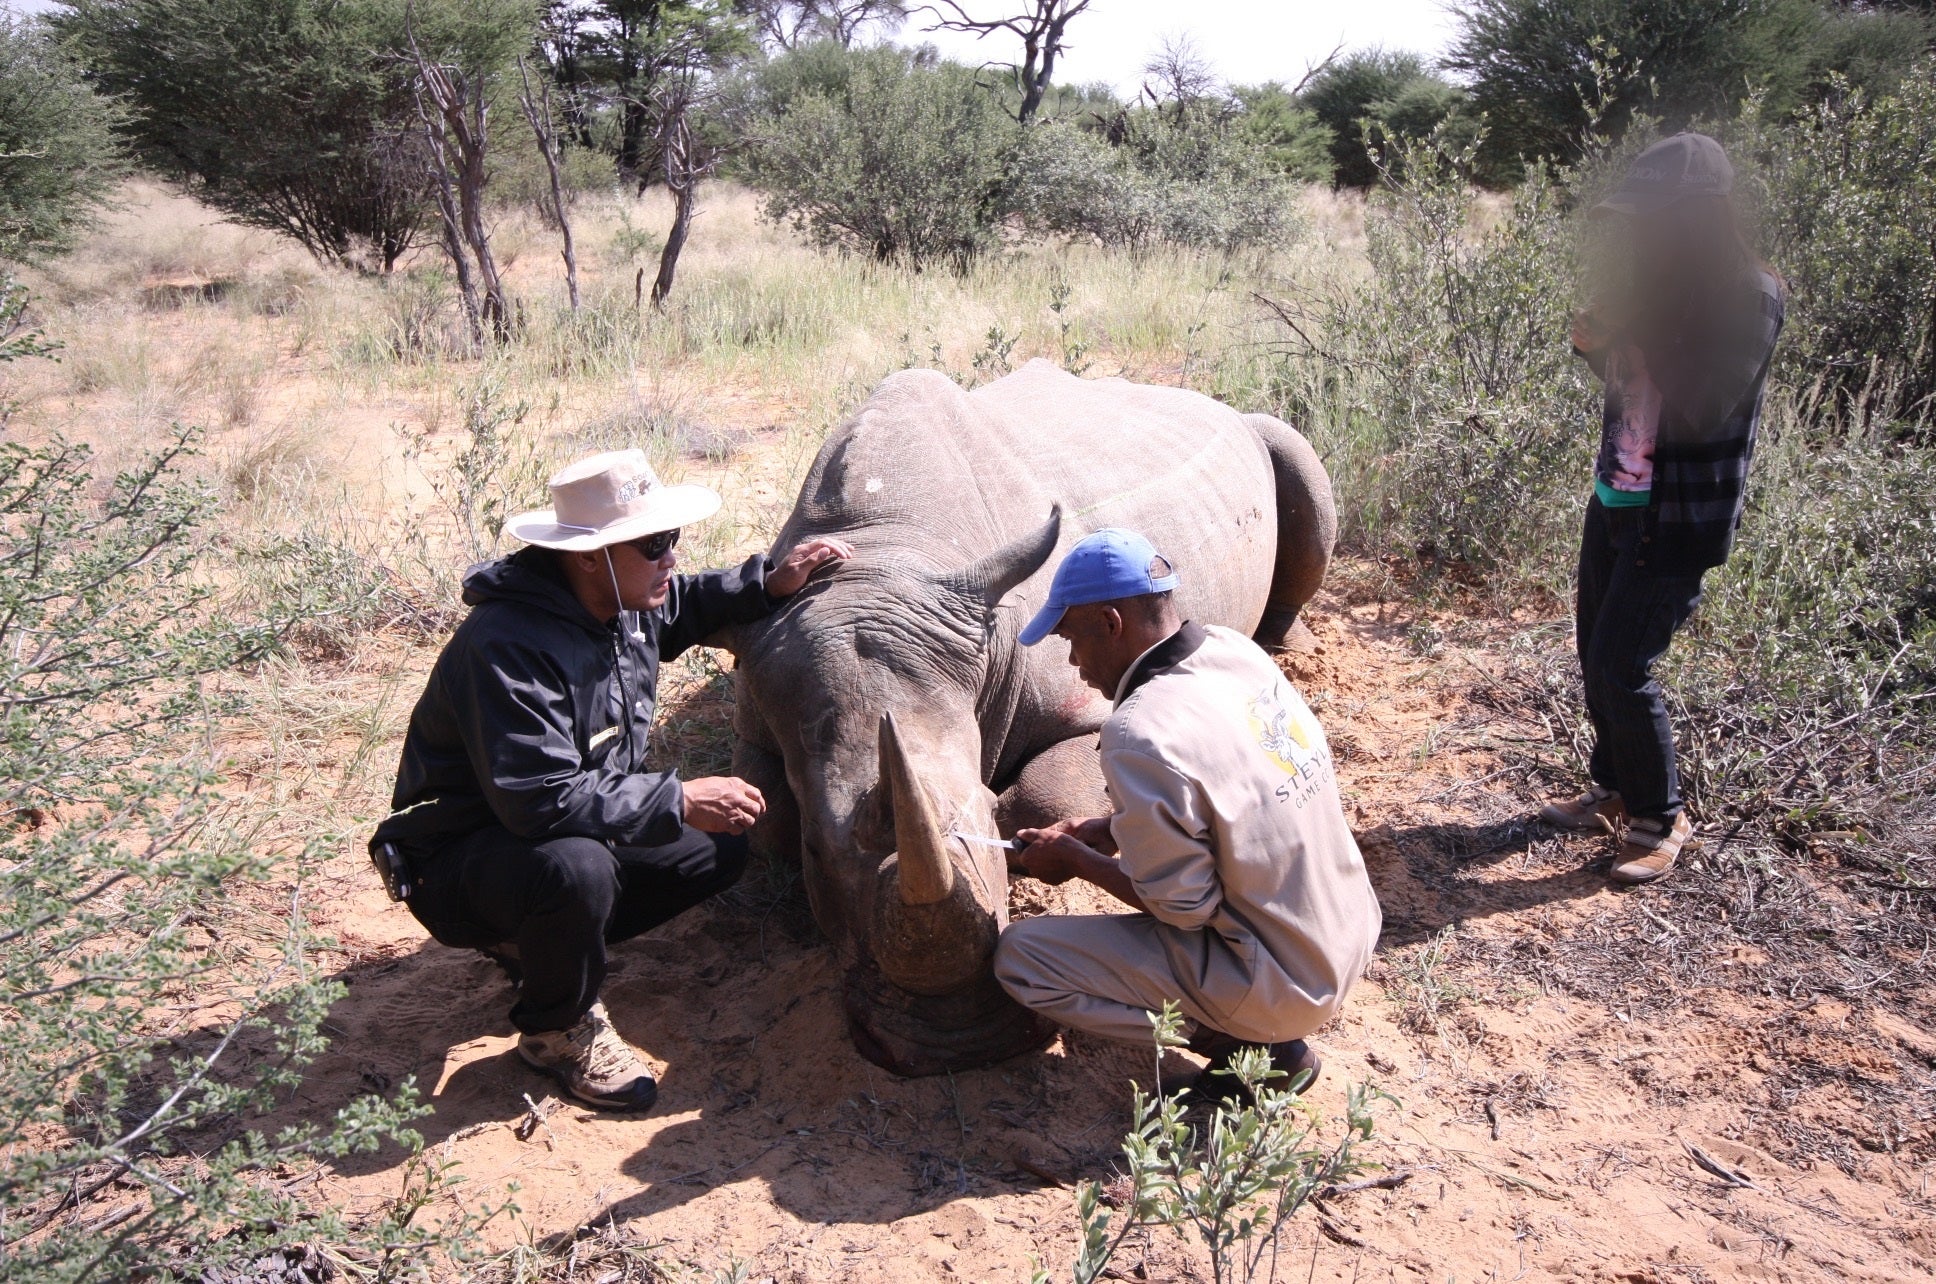 A sex-trafficking victim being instructed on how to pose next to a fallen rhino